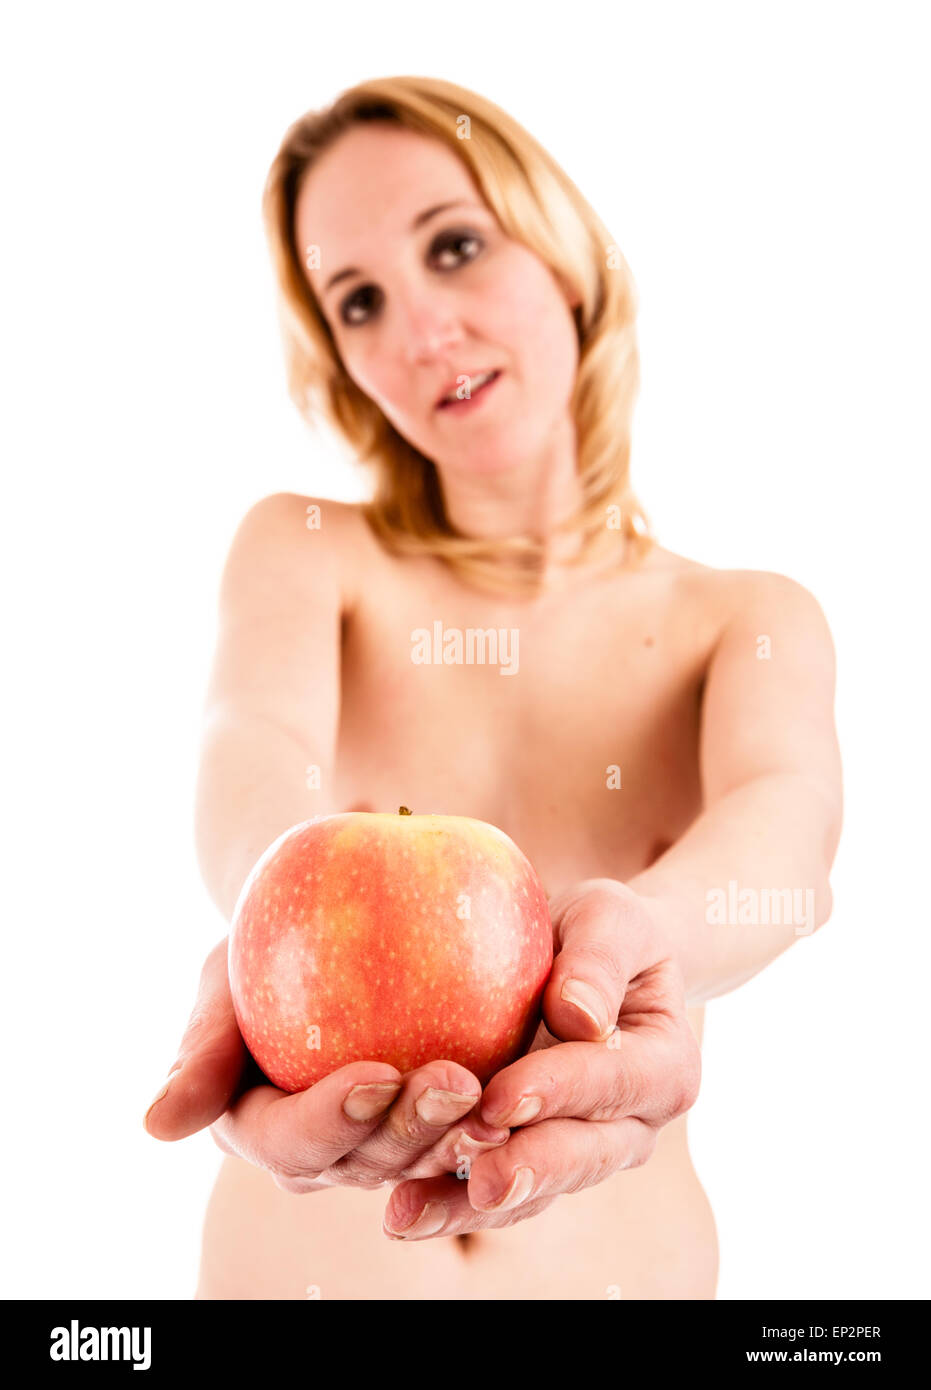 Temptation - a young naked woman offering an apple Stock Photo